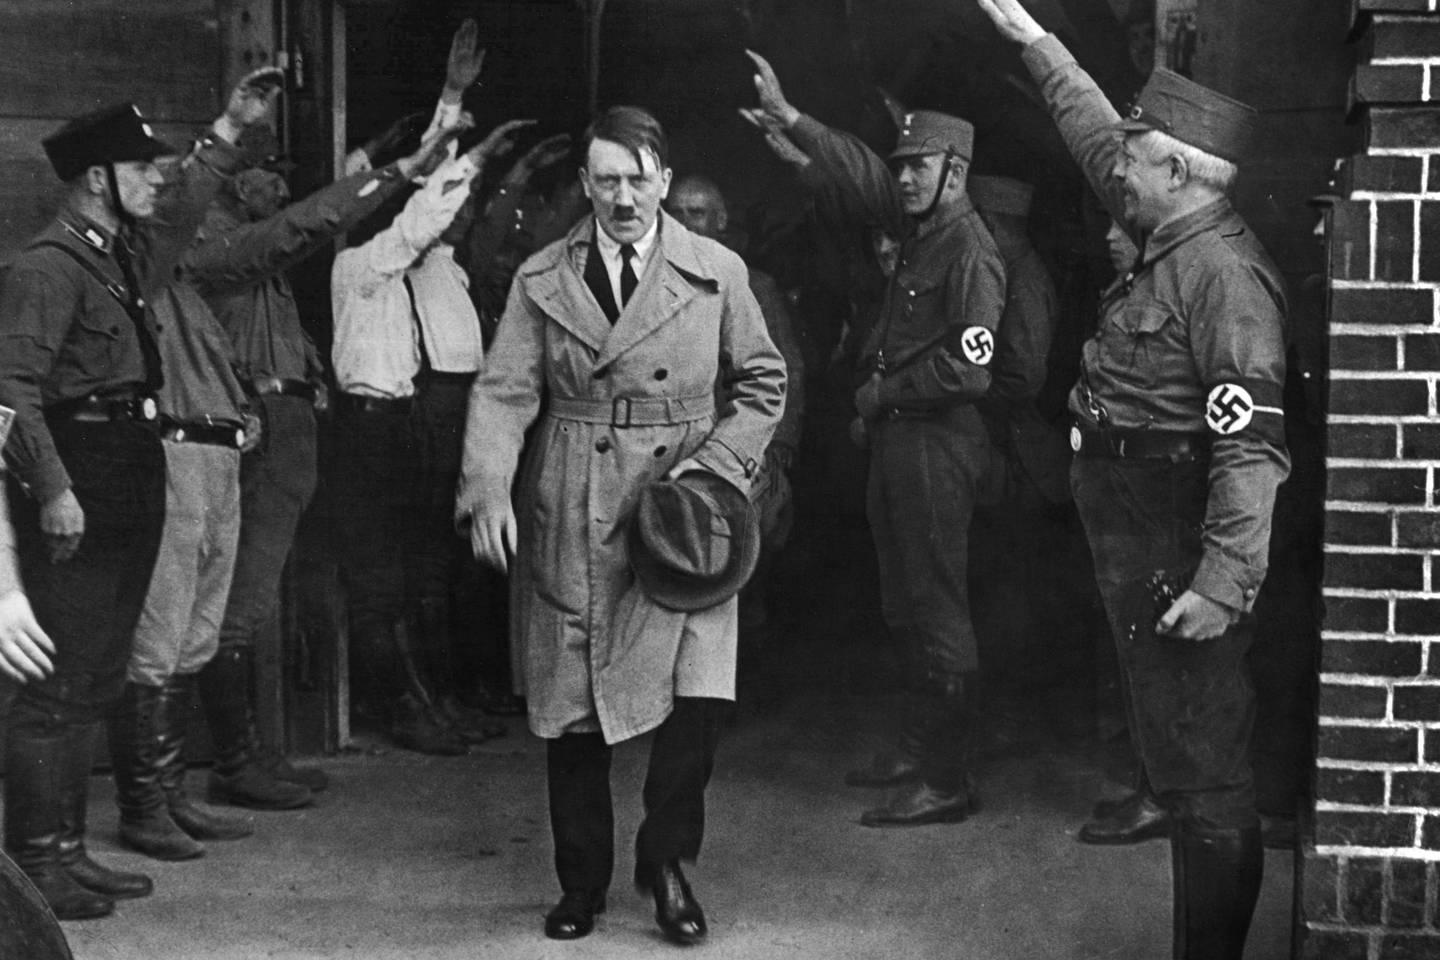 FILE - In this Dec. 5, 1931 file photo Adolf Hitler, leader of the National Socialists, leaves the party's Munich, Germany headquarters. On Friday, June 12, 2020, The Associated Press reported on stories circulating online incorrectly asserting that Hitler defunded the police and installed his own enforcers. Gavriel D. Rosenfeld, a historian and history professor at Fairfield University says, "Lets just say the Nazis did everything BUT defund the police, noting that Nazis made the police one of the chief recipients of state financial support aside from military spending. (AP Photo/File)